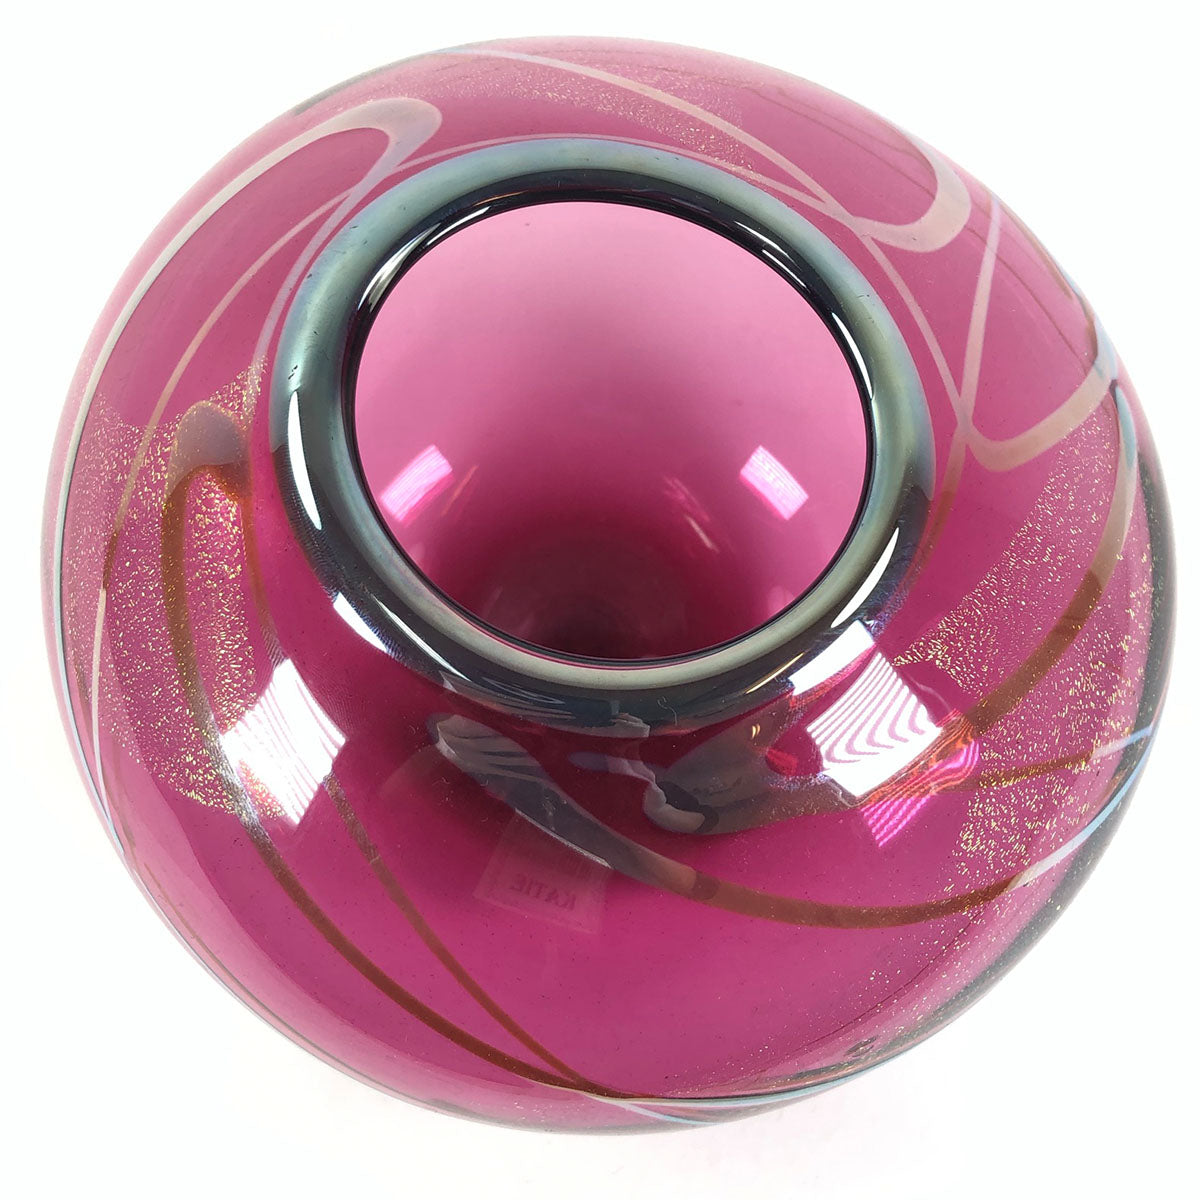 Selena Abstract Glass Vase Pink - Mint by michelle